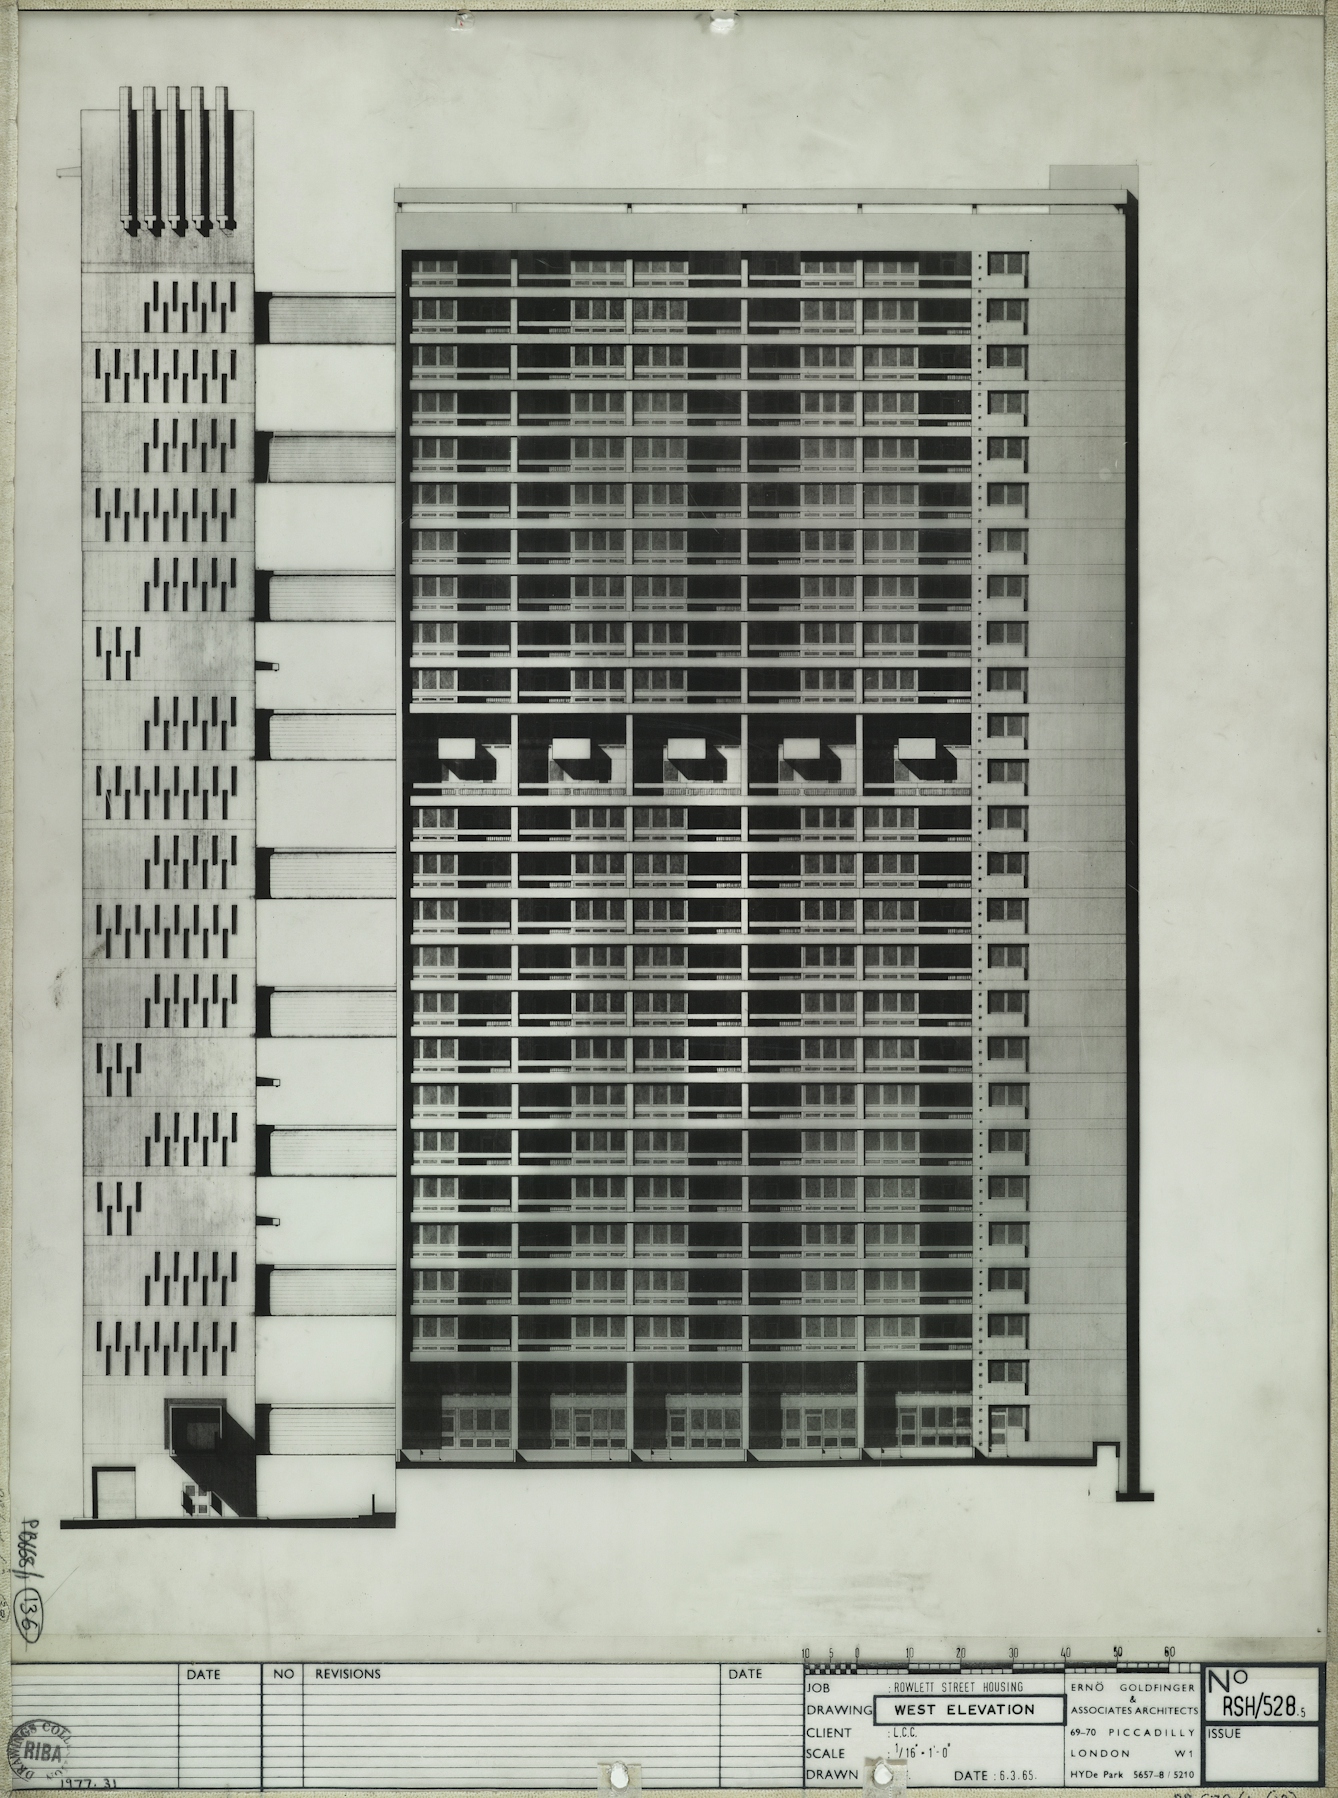 Black-and-white designs for Balfront Tower. At the bottom of the print it reads: Rowlett Street Housing, West Elevation. Date: 6.3.65 Erno Goldfinger and Associates Archtitects, 69-70 Piccadilly London W1 Hyde Park. No RSH 528.5